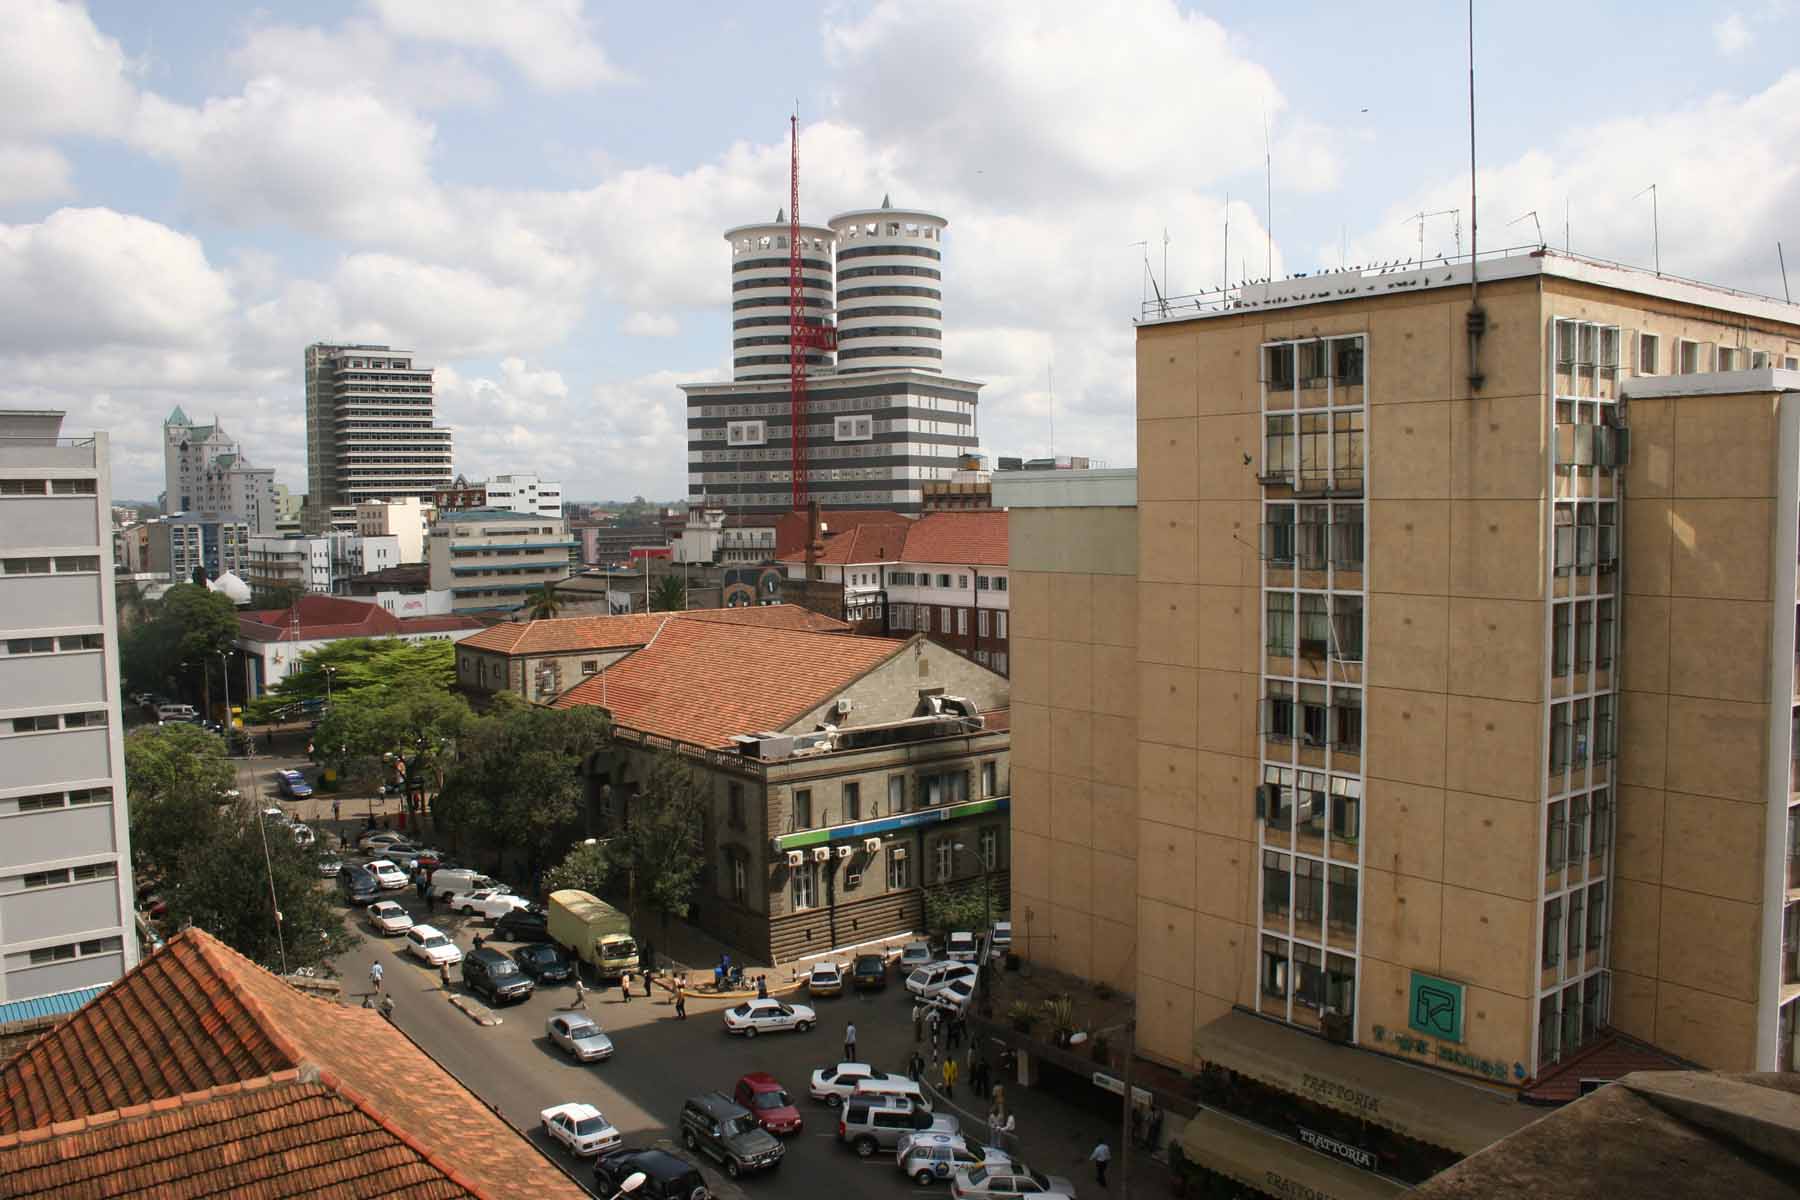 View Of Nairobi Showing The Eclectic Mix Of Modern & Neo-Classical Architecture Built To Thornton White's 1947 Master Plan